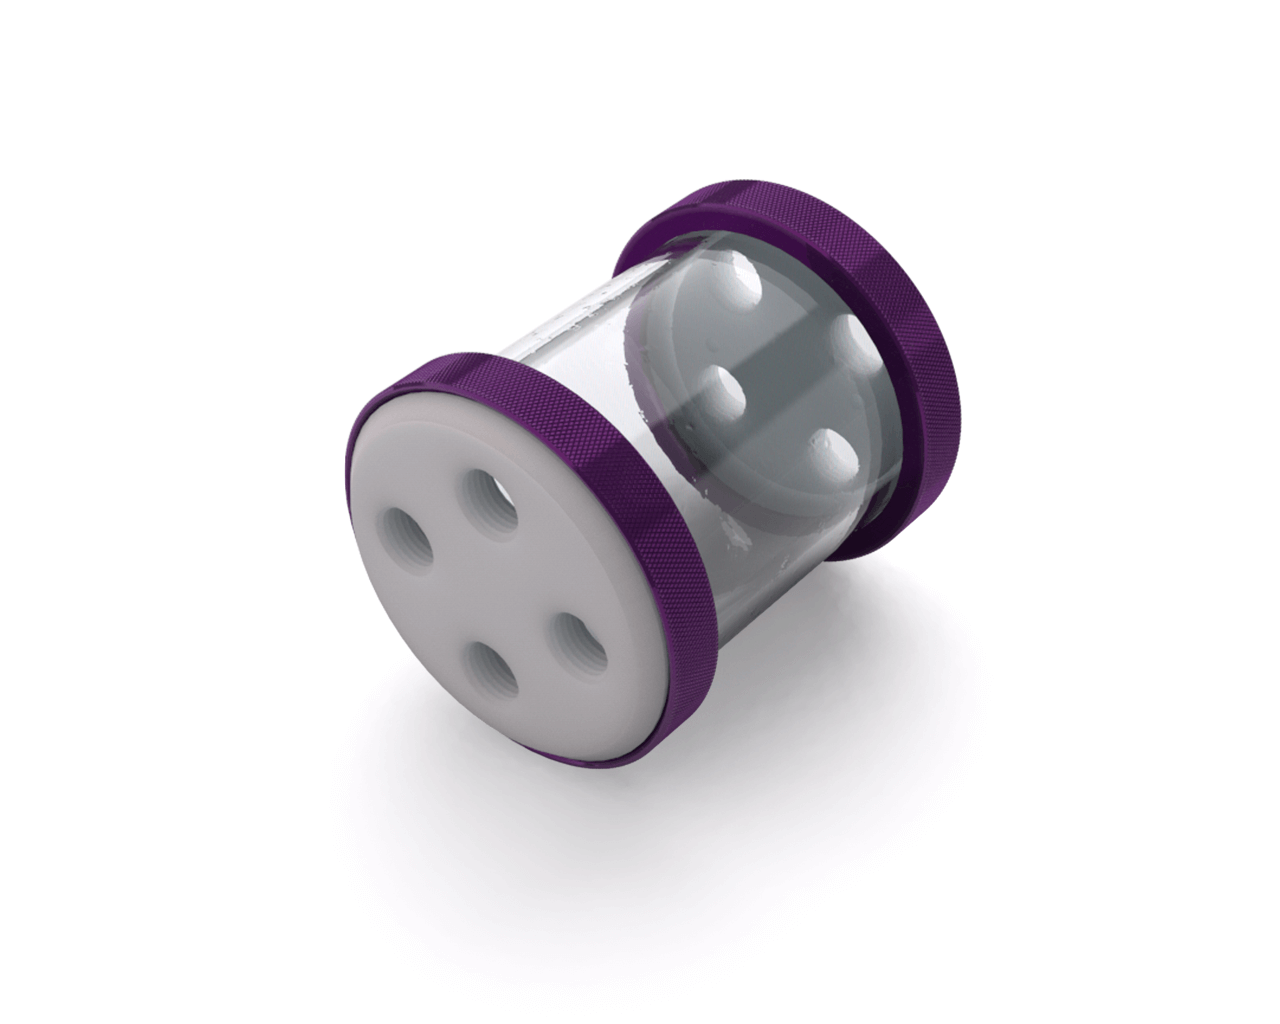 PrimoChill CTR Low Profile Phase II Reservoir - White POM - 80mm - PrimoChill - KEEPING IT COOL Candy Purple